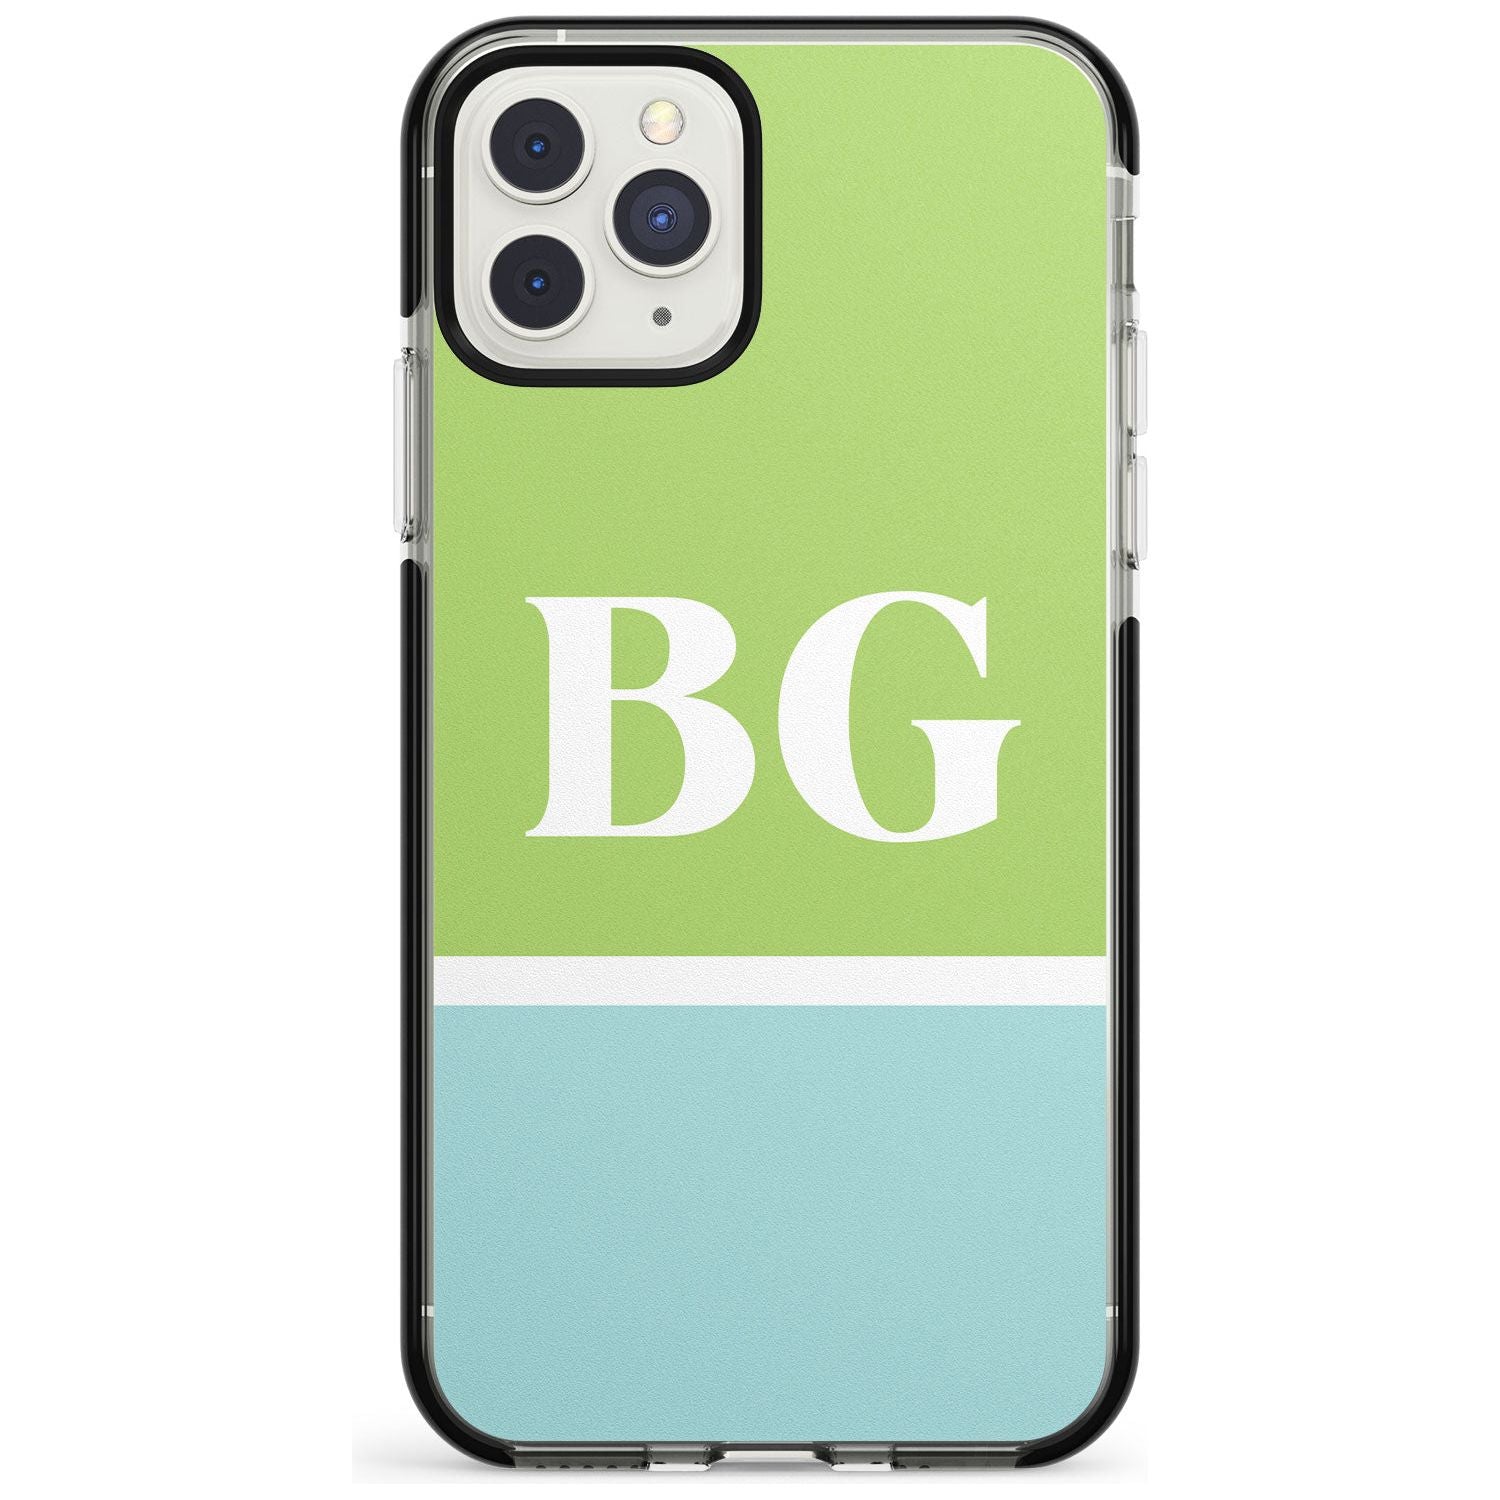 Colourblock: Green & Turquoise Black Impact Phone Case for iPhone 11 Pro Max